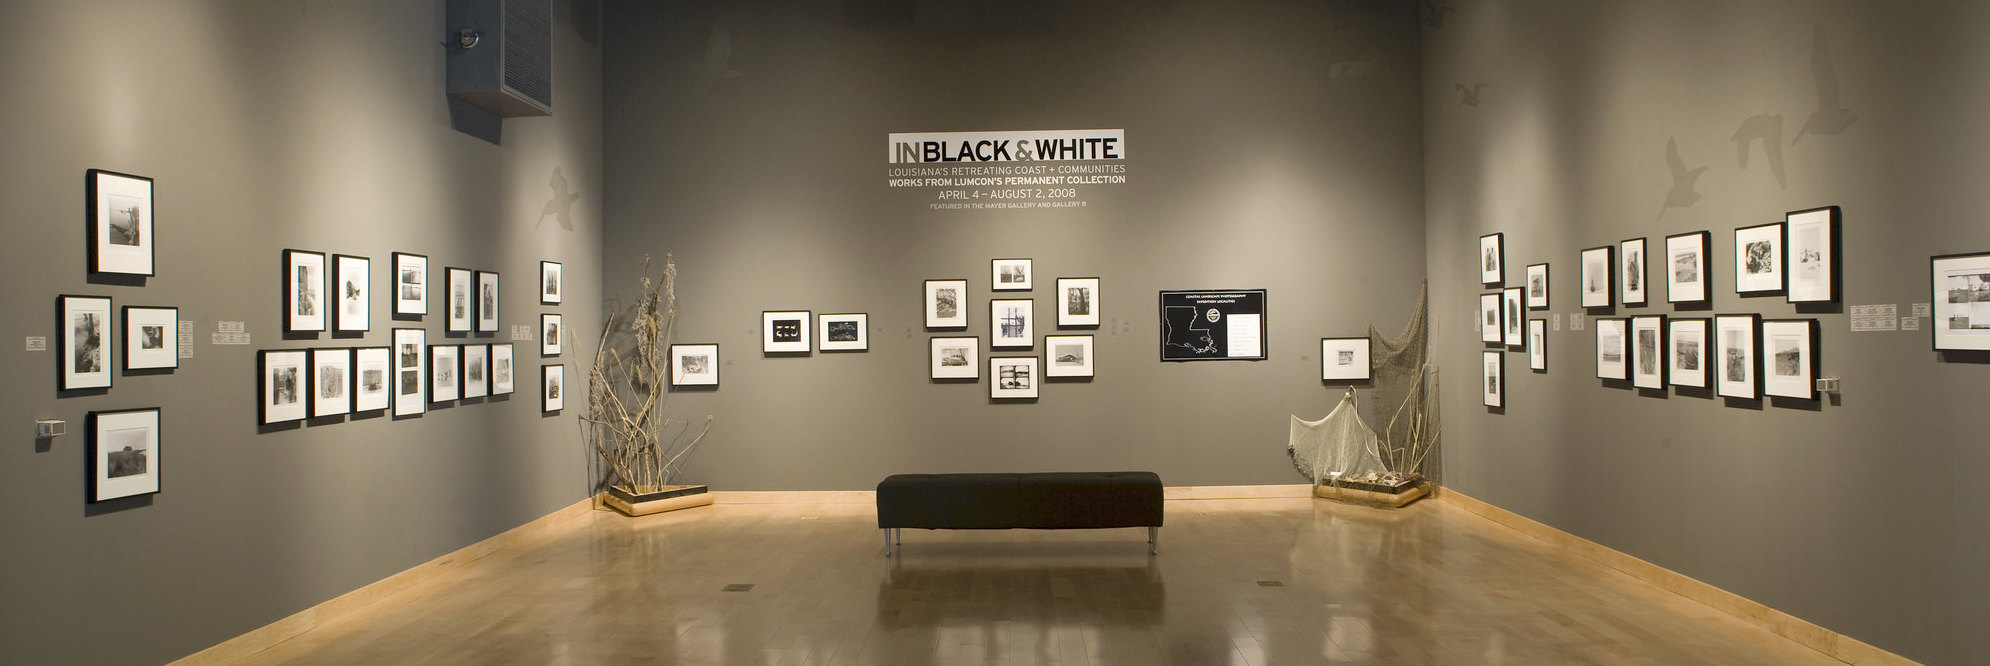 IN Black & White: Louisiana’s Retreating Coast and Communities: Works from LUMCON’s Permanent Collection